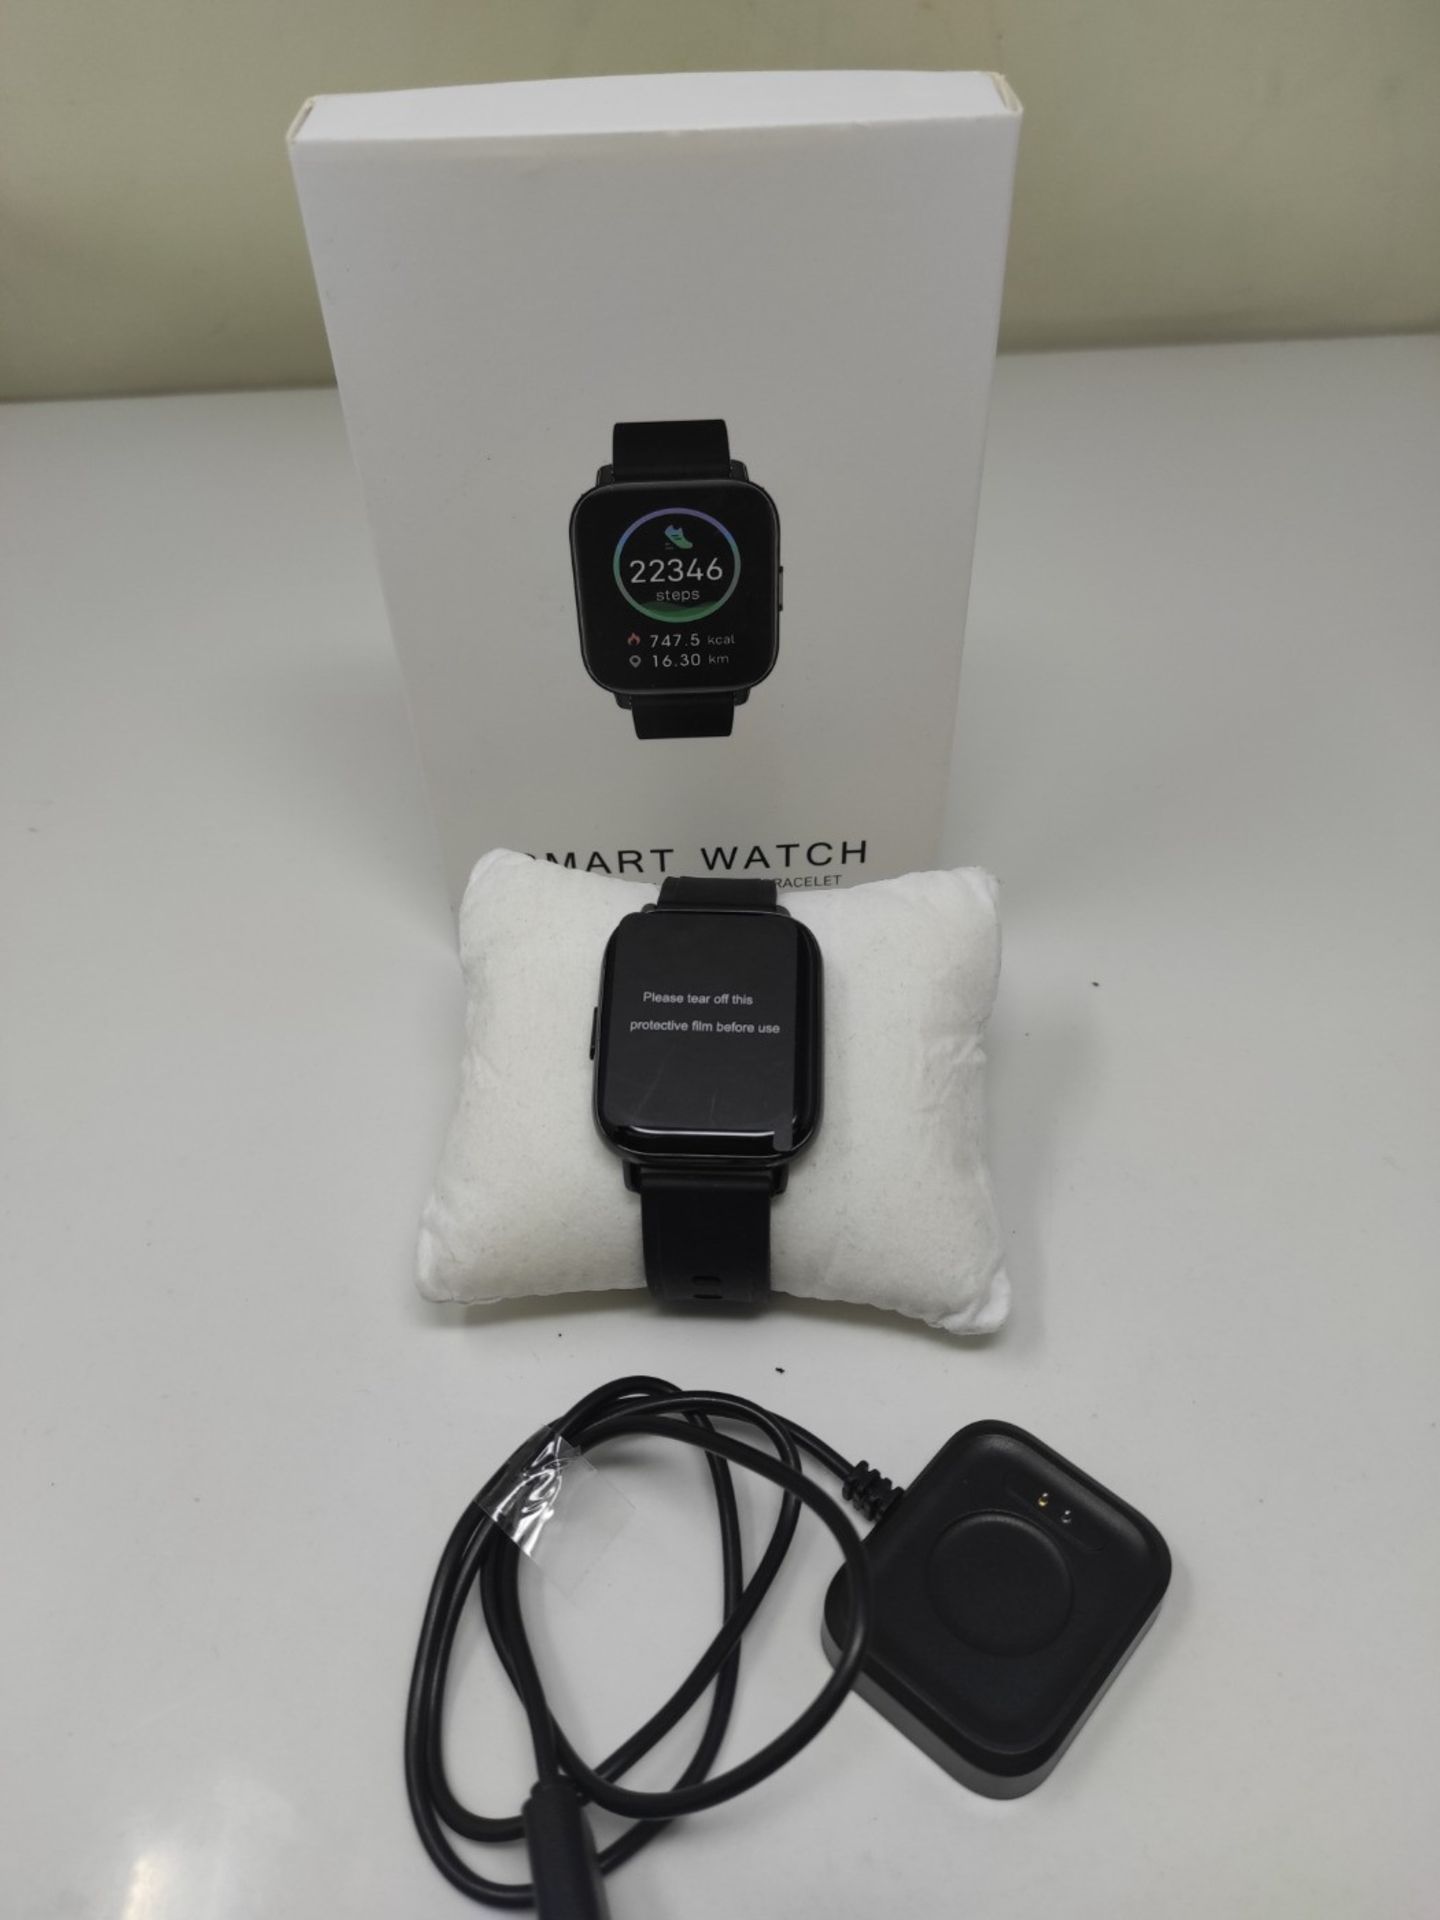 Smart Watch, 1.69 Inch Fitness Tracker, Activity Tracker with Sleep Heart Rate Monitor - Image 2 of 3